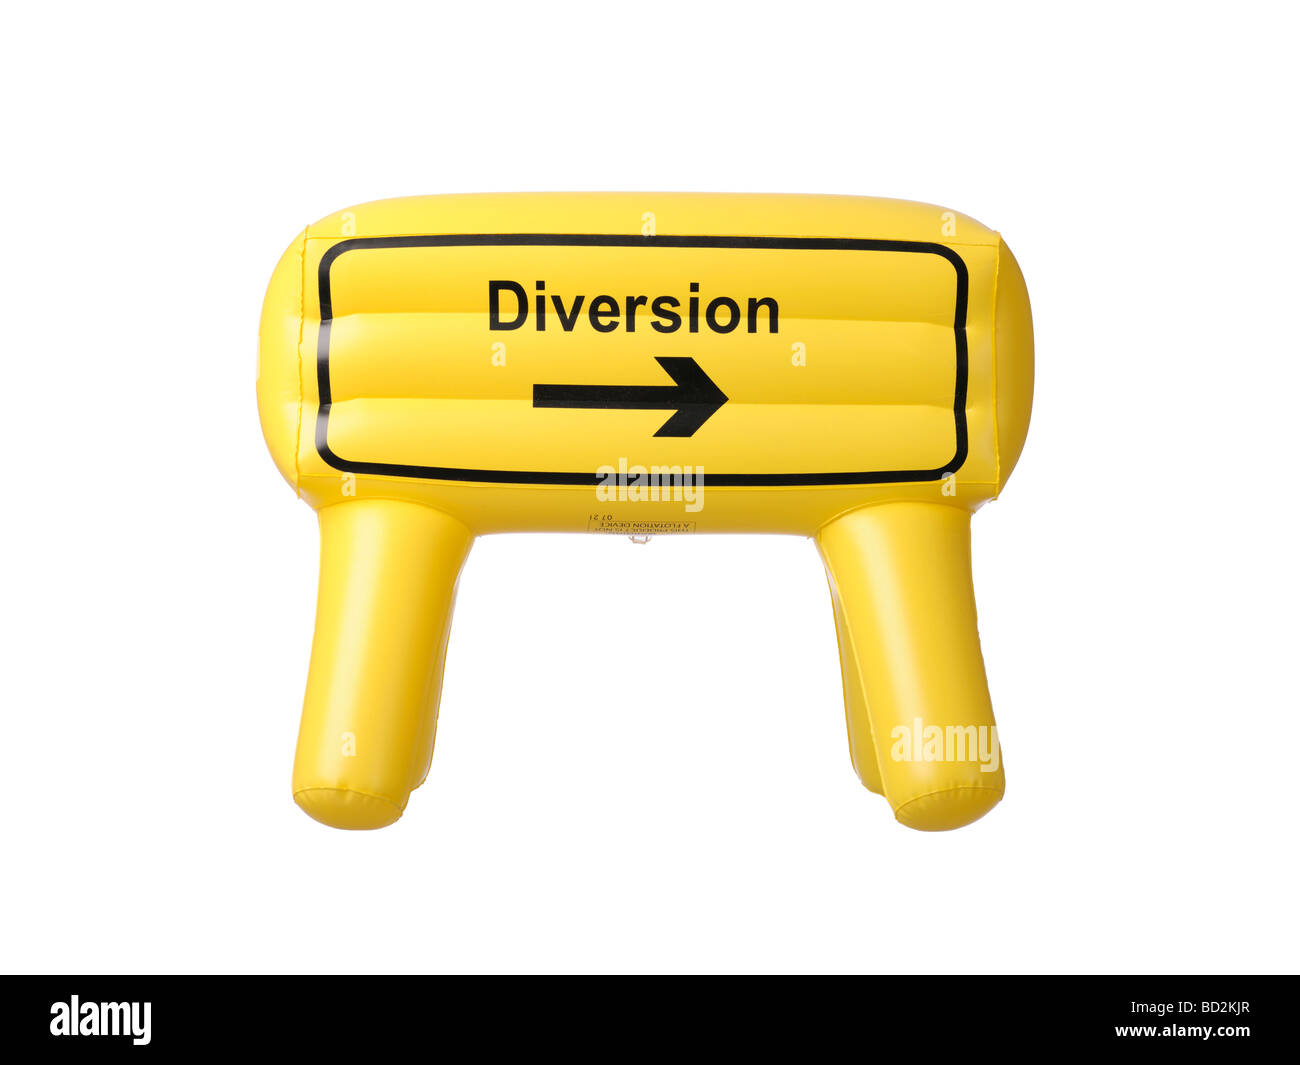 Inflatable diversion sign Stock Photo